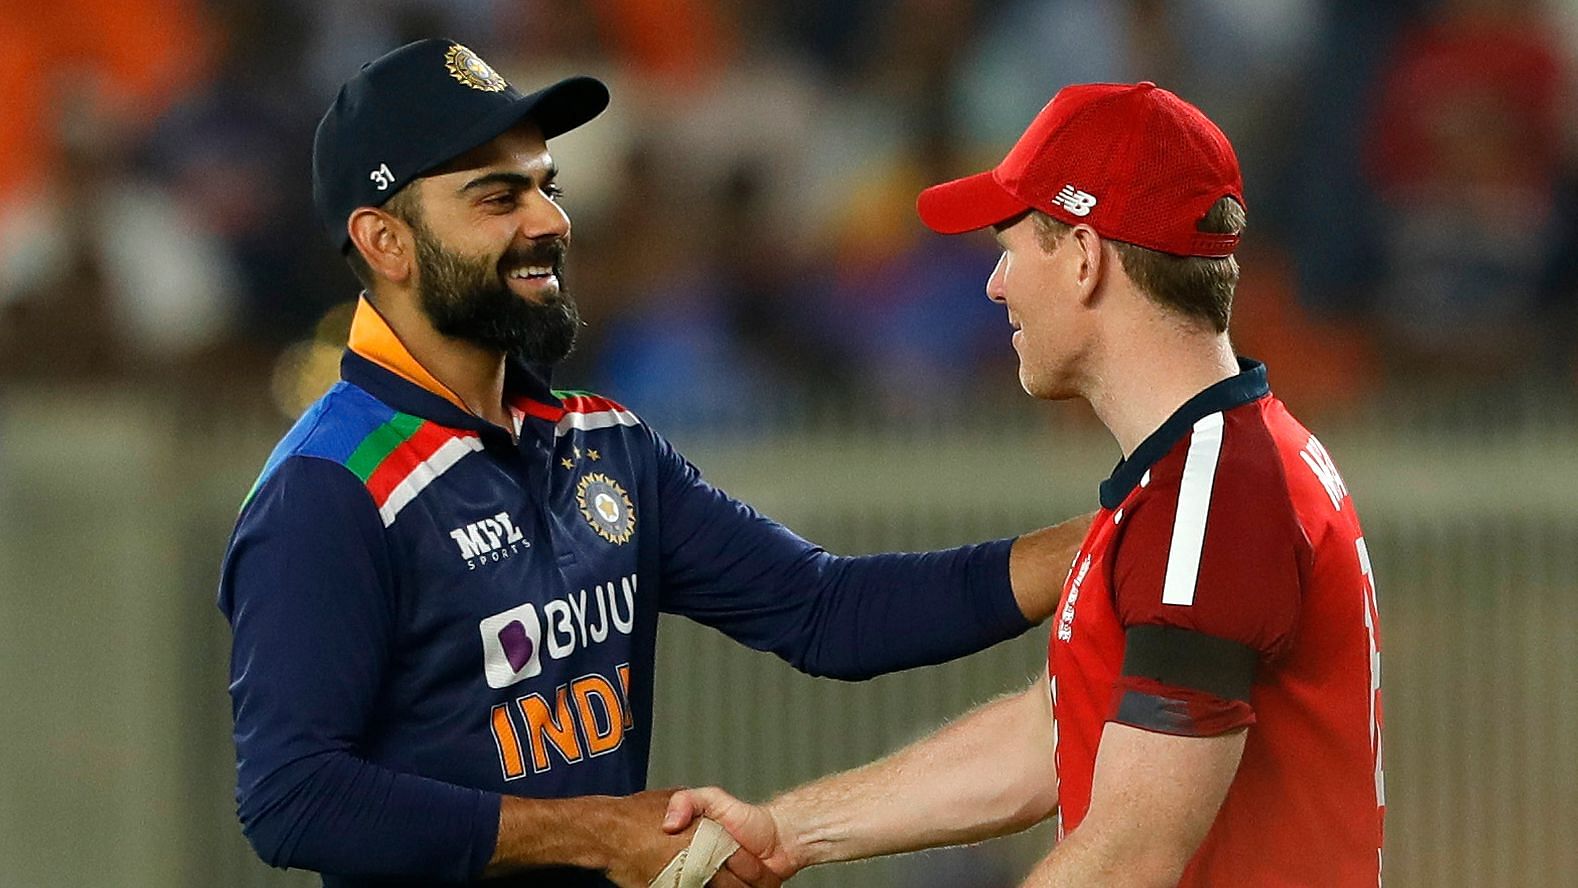 Virat Kohli(Captain) of India and Eoin Morgan (Captain) of England players doing handshakes after the match during the 1st T20 International between India and England held at the Narendra Modi Stadium, Ahmedabad, Gujarat, India on the 12th March 2021